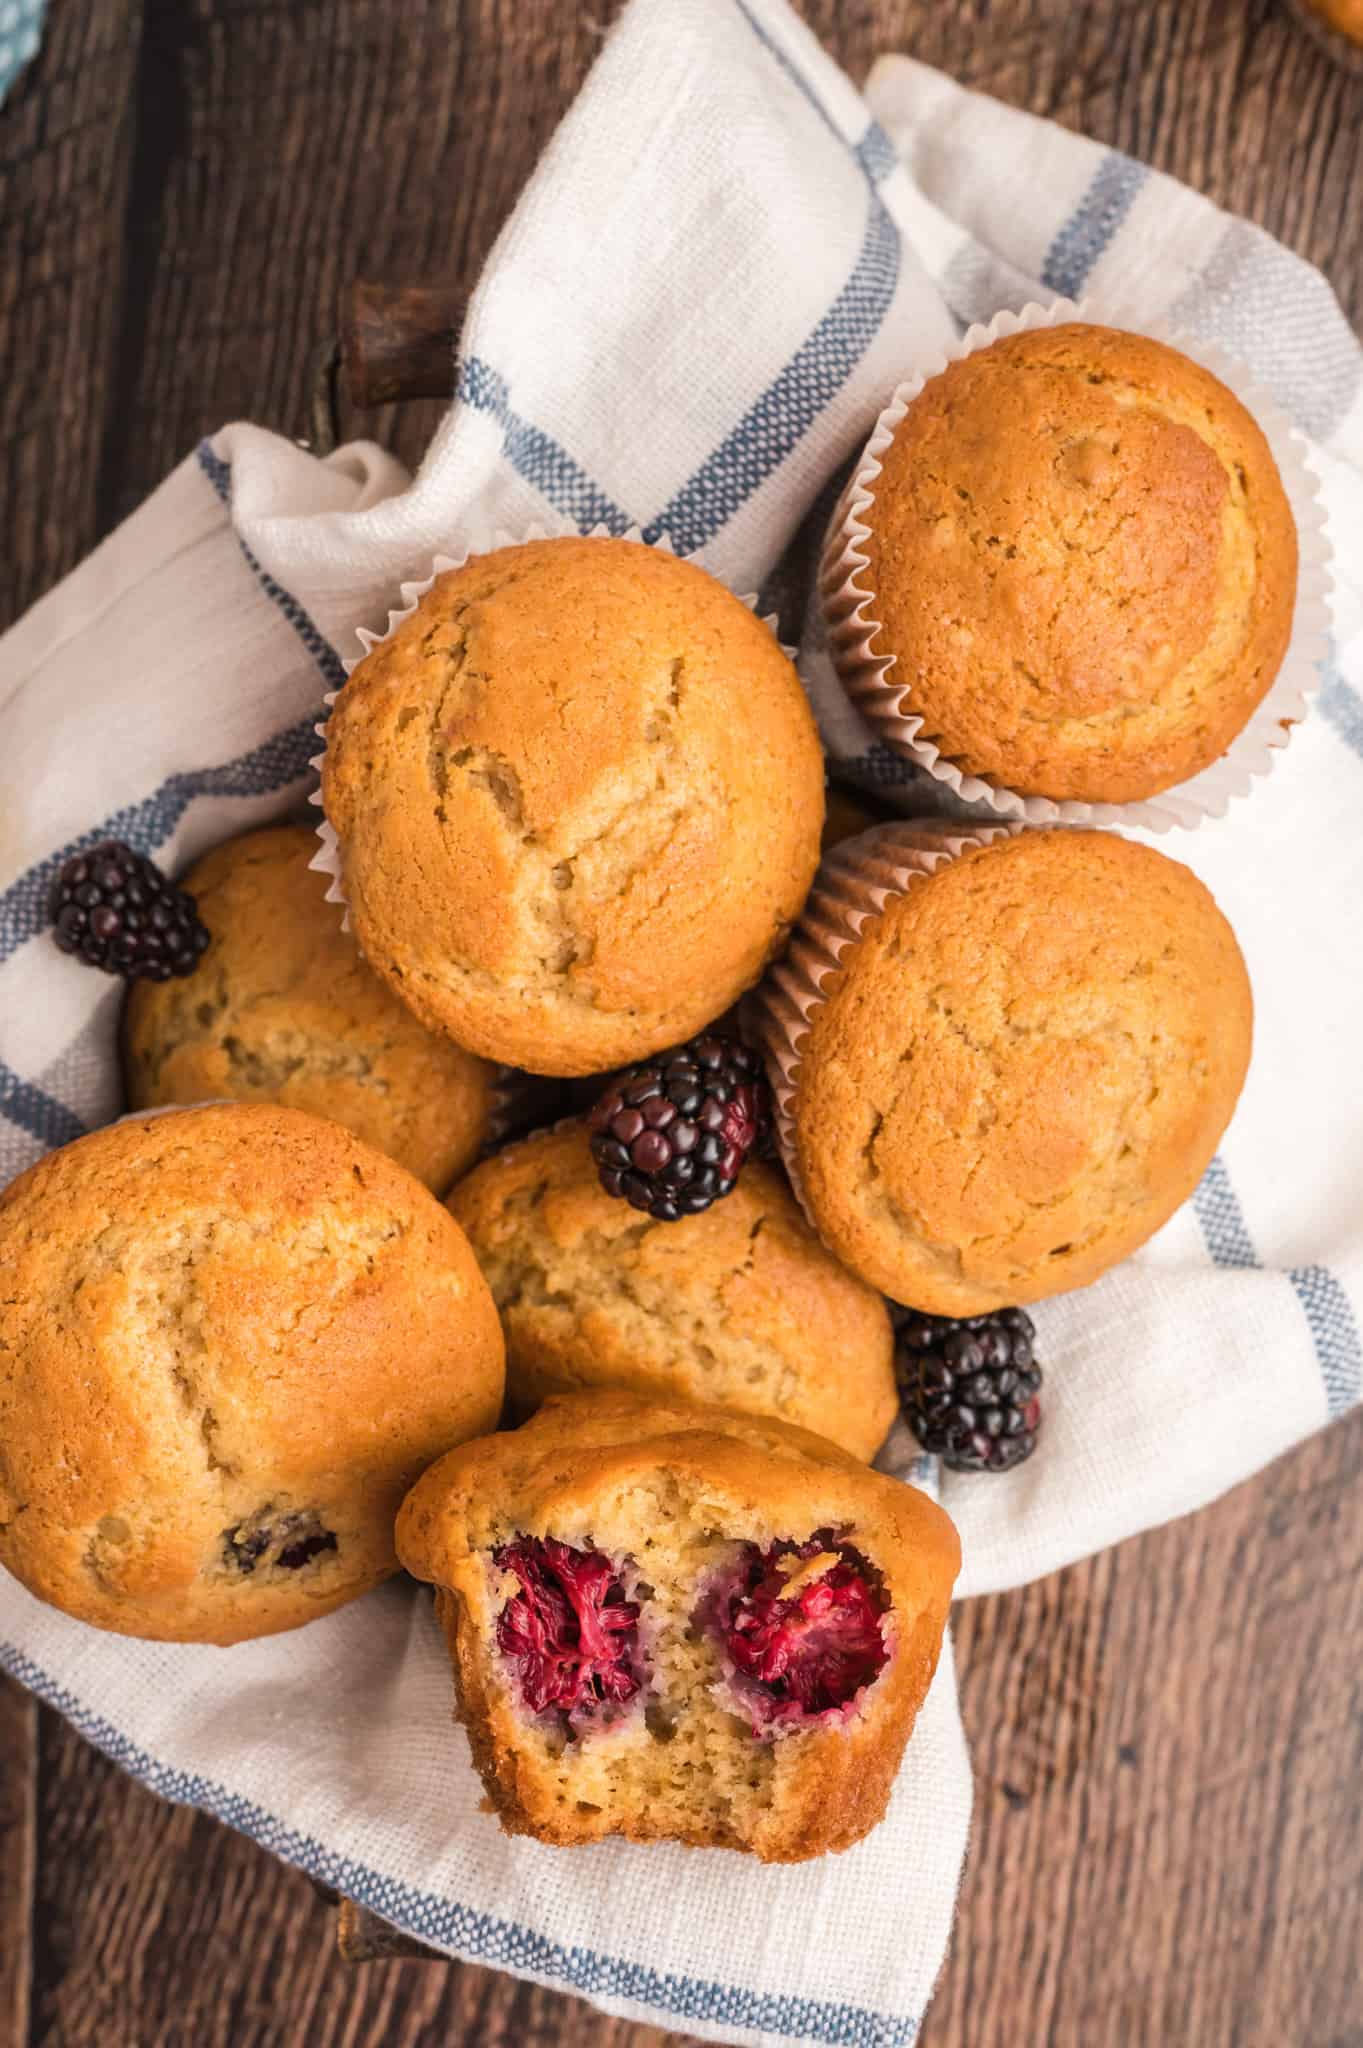 Blackberry Muffins are the perfect snack or breakfast food. These tasty muffins are seasoned with cinnamon and loaded with fresh blackberries.